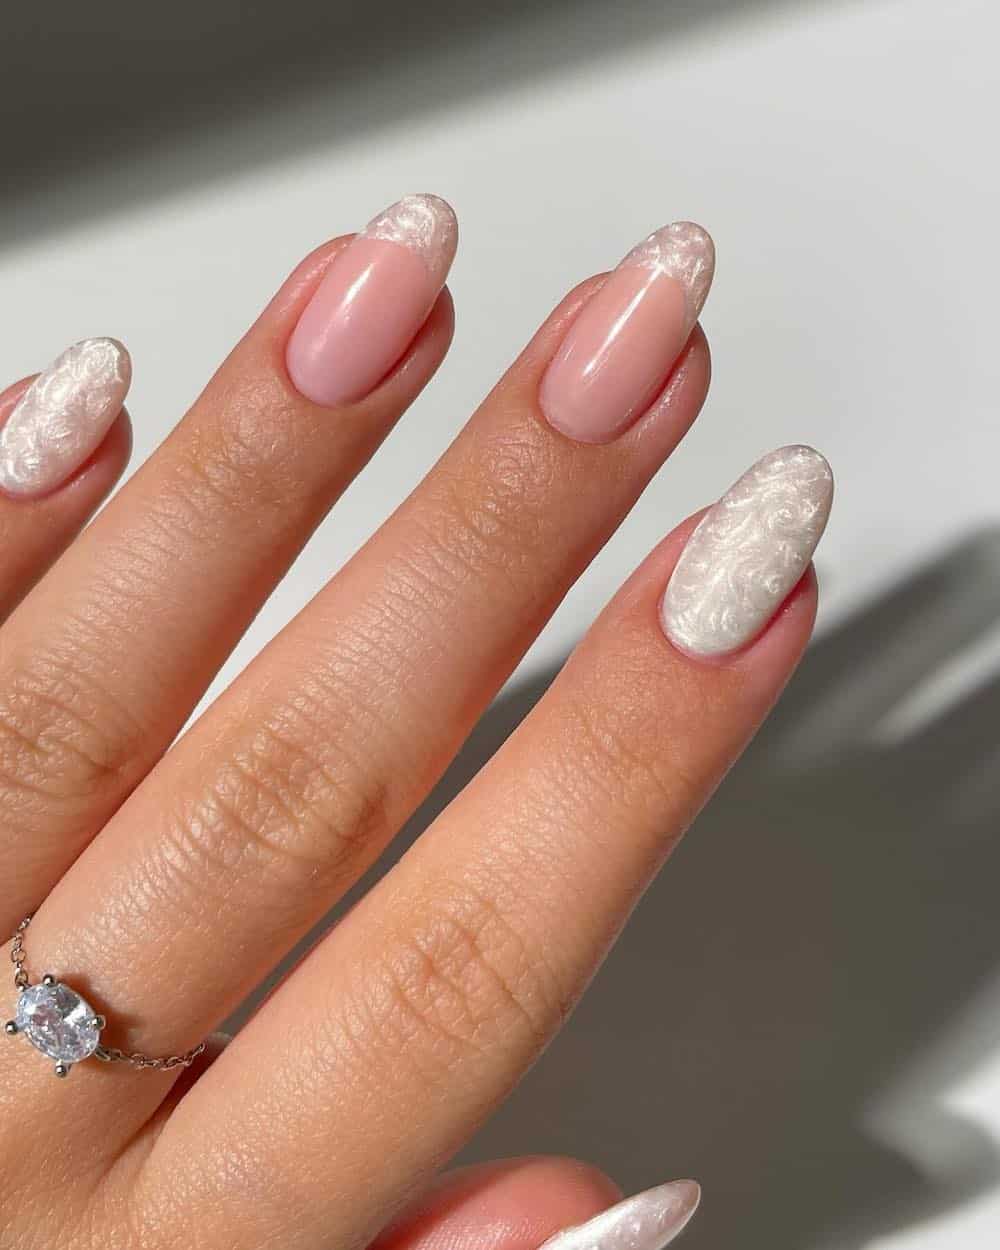 A hand with short almond nails painted a swirling pearly white with French tip accents